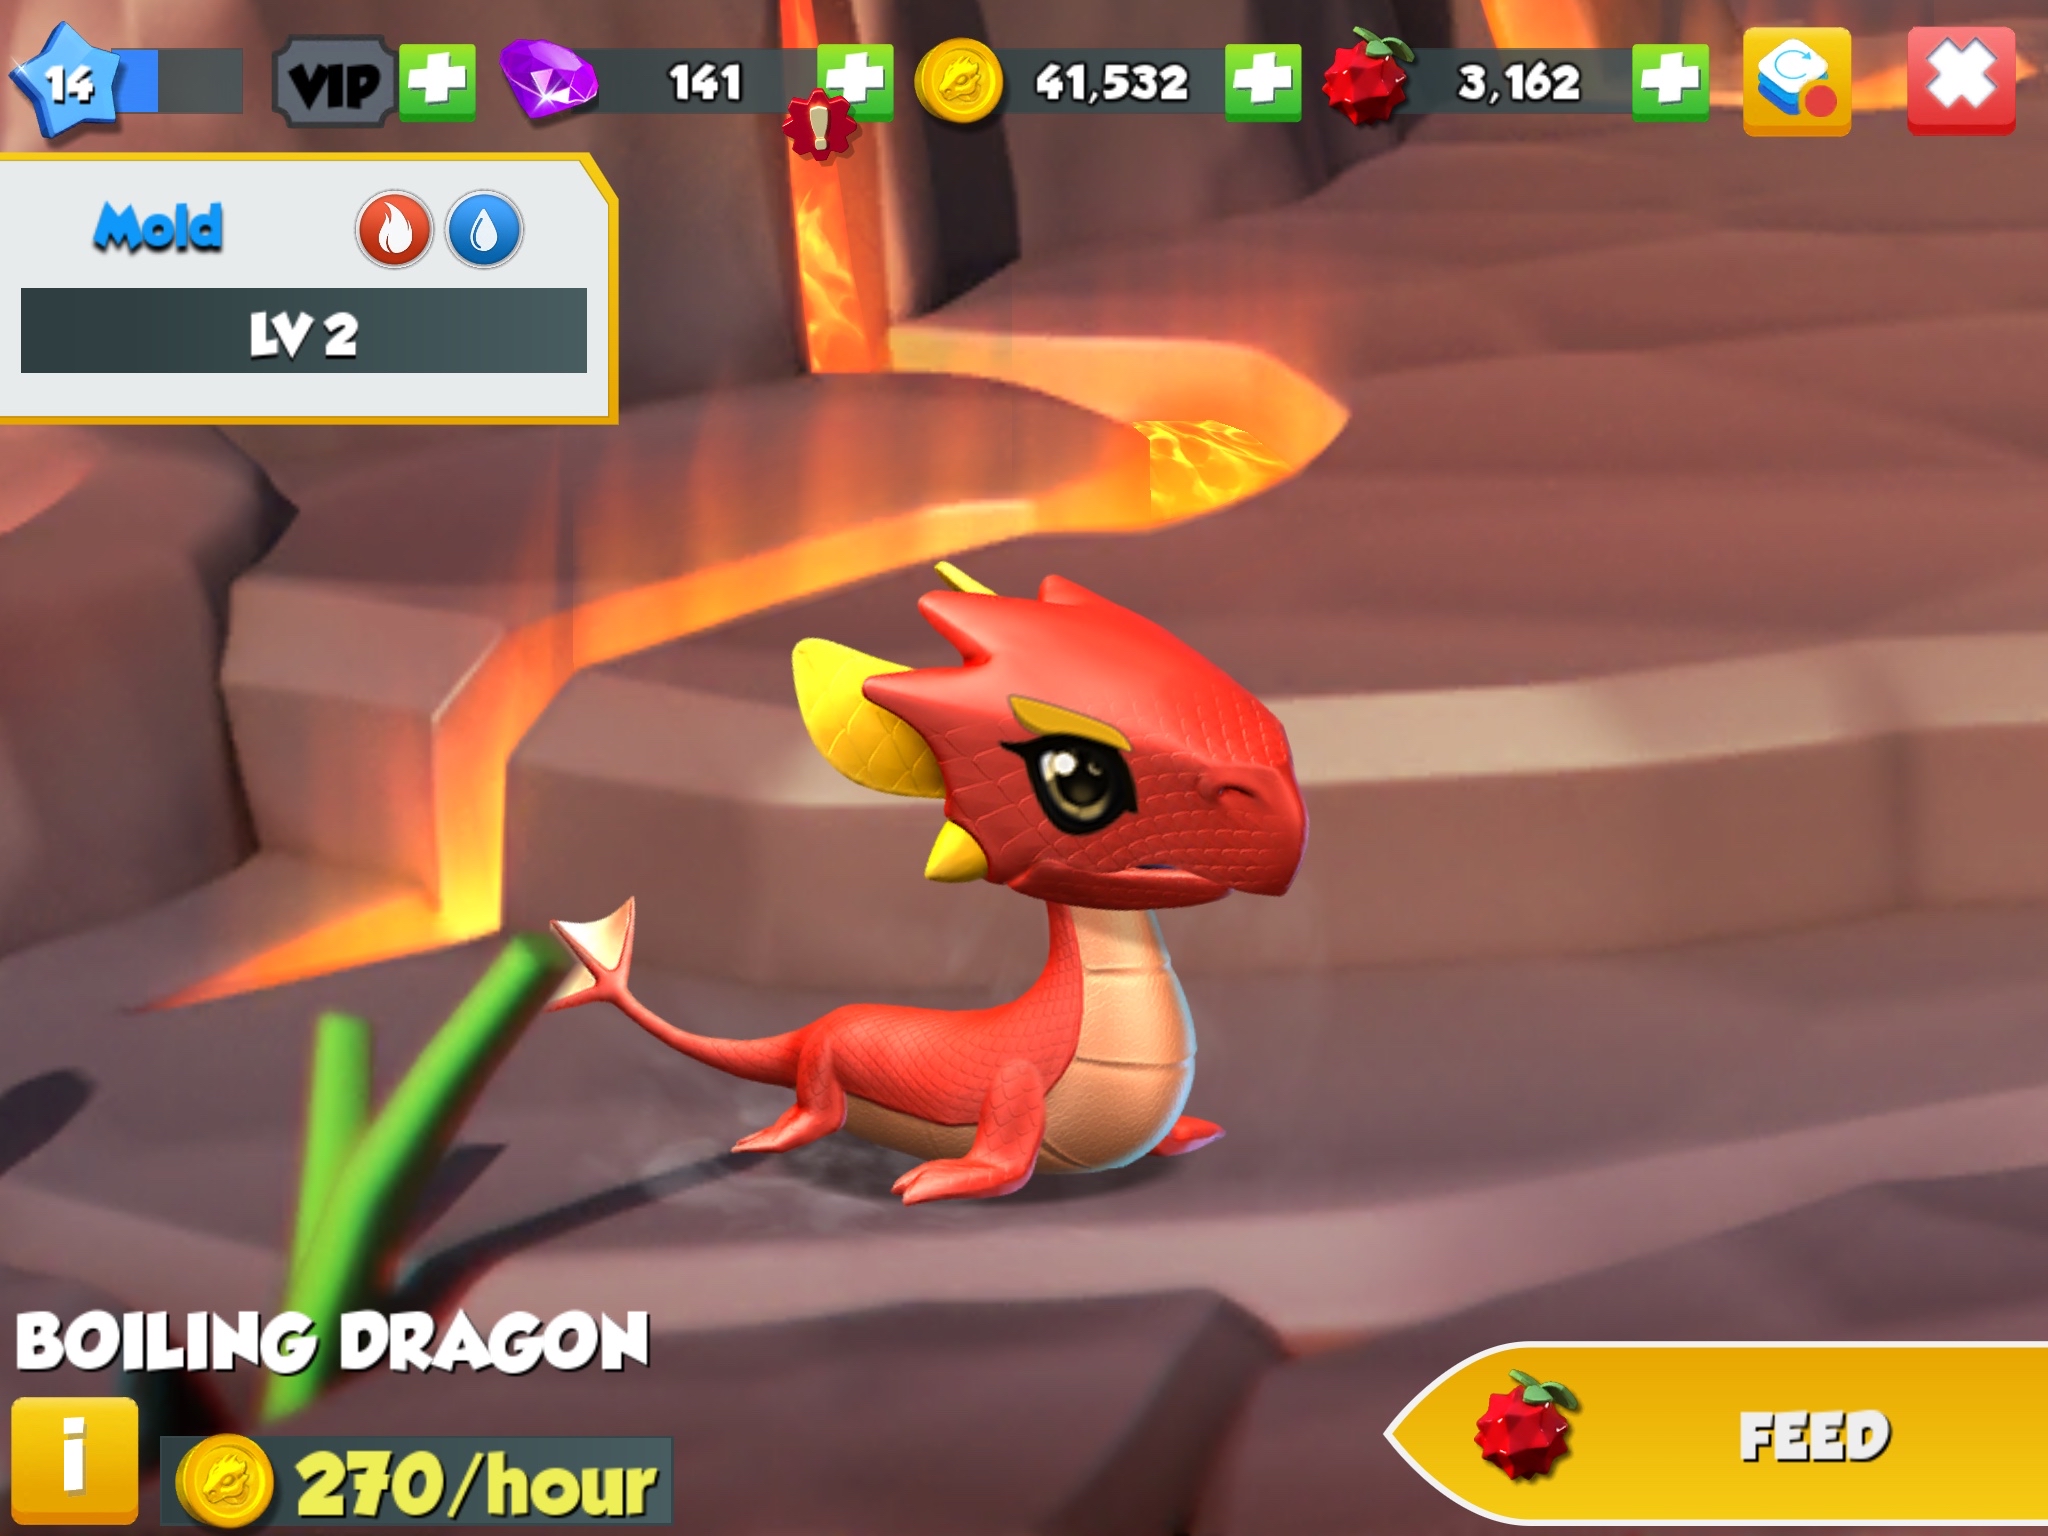 do in eed dragons on habitats to earn money and dragon mania legends